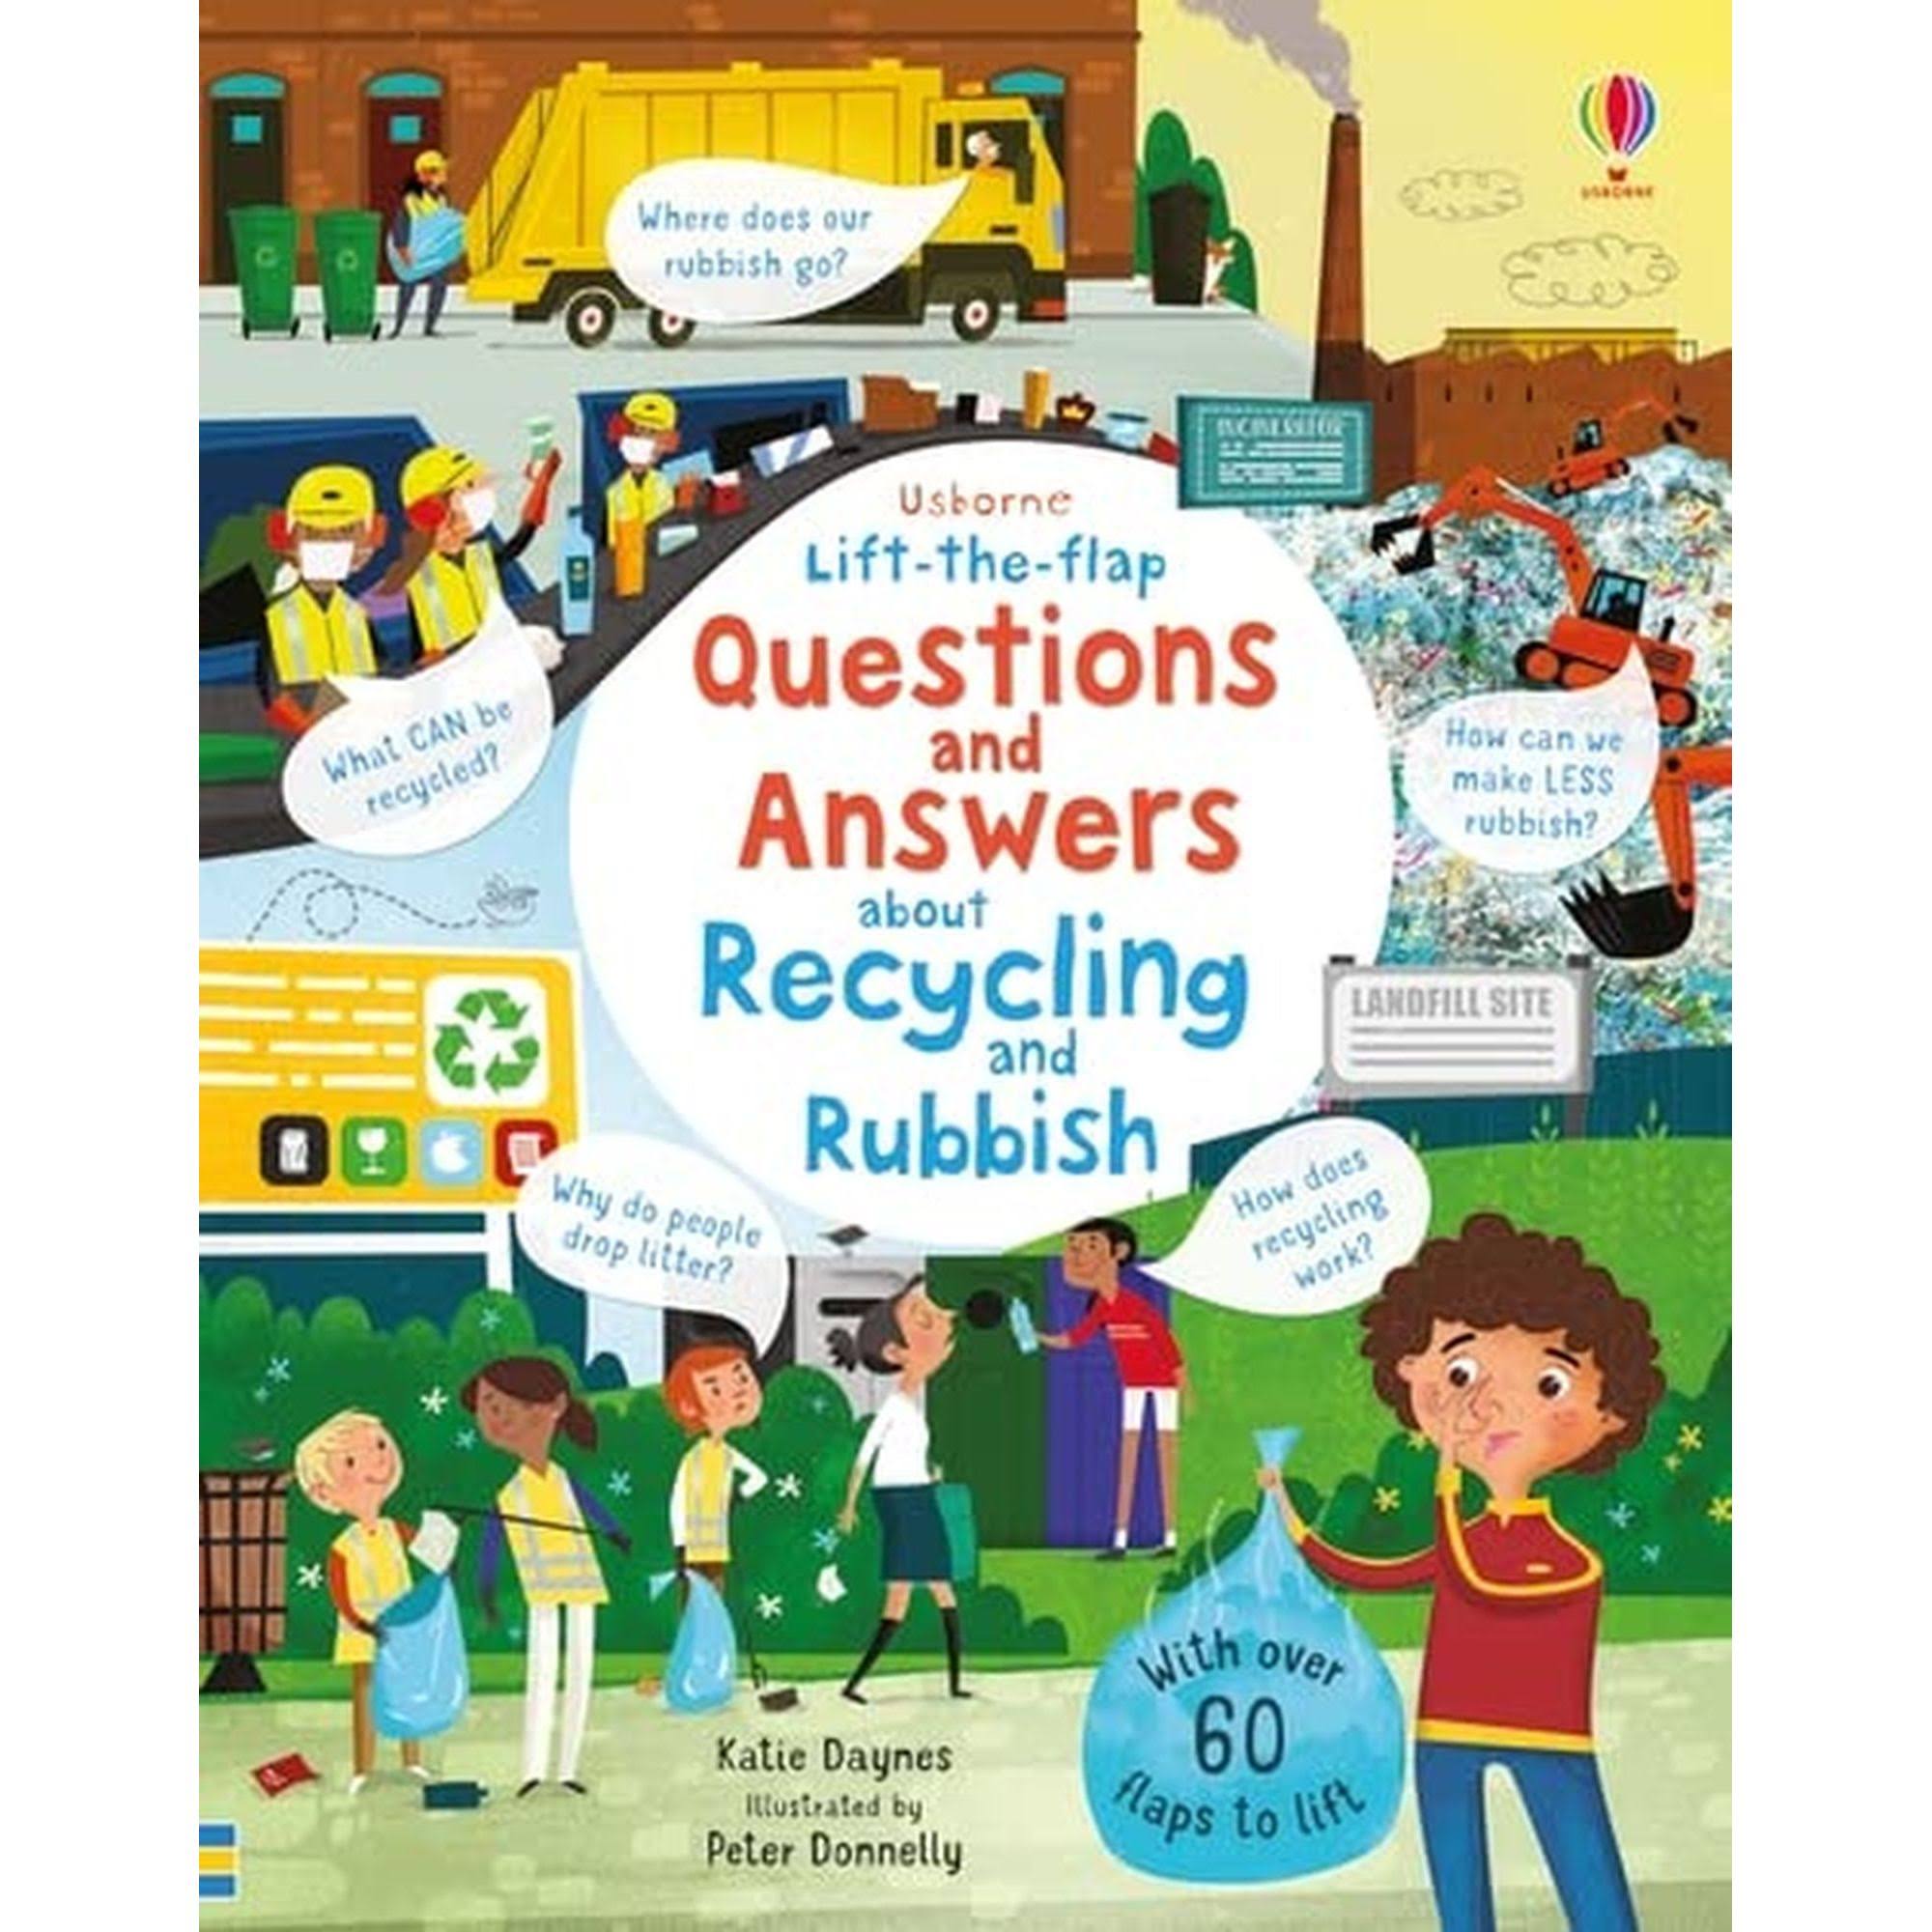 Lift-The-Flap Questions and Answers about Recycling and Rubbish [Book]